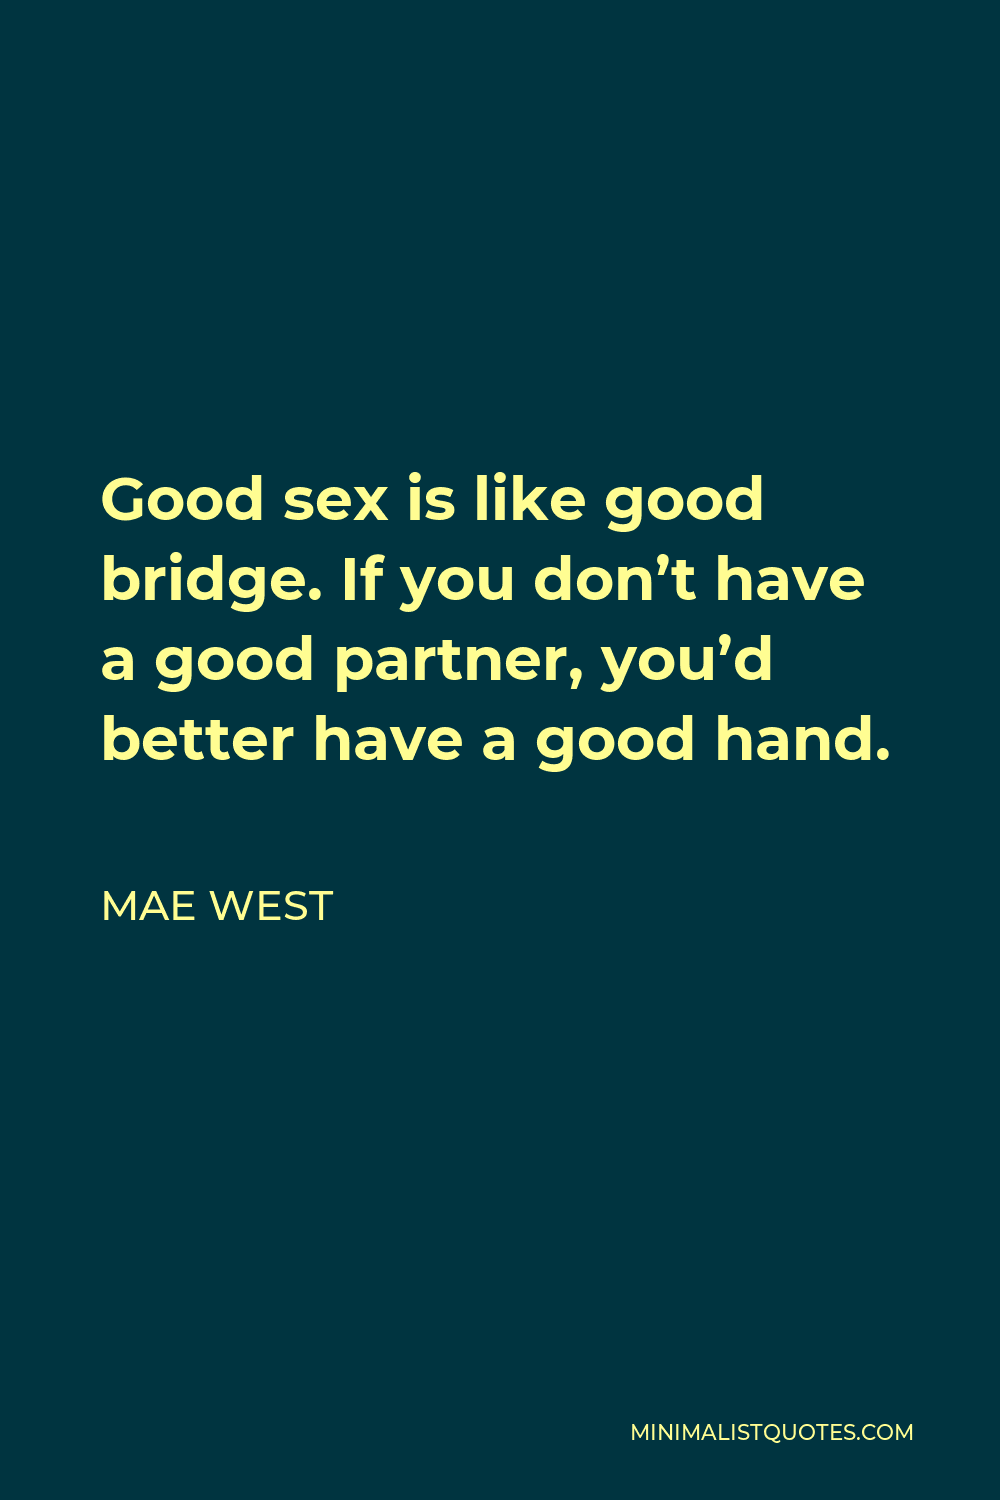 Mae West Quote Good Sex Is Like Good Bridge If You Don T Have A Good Partner You D Better